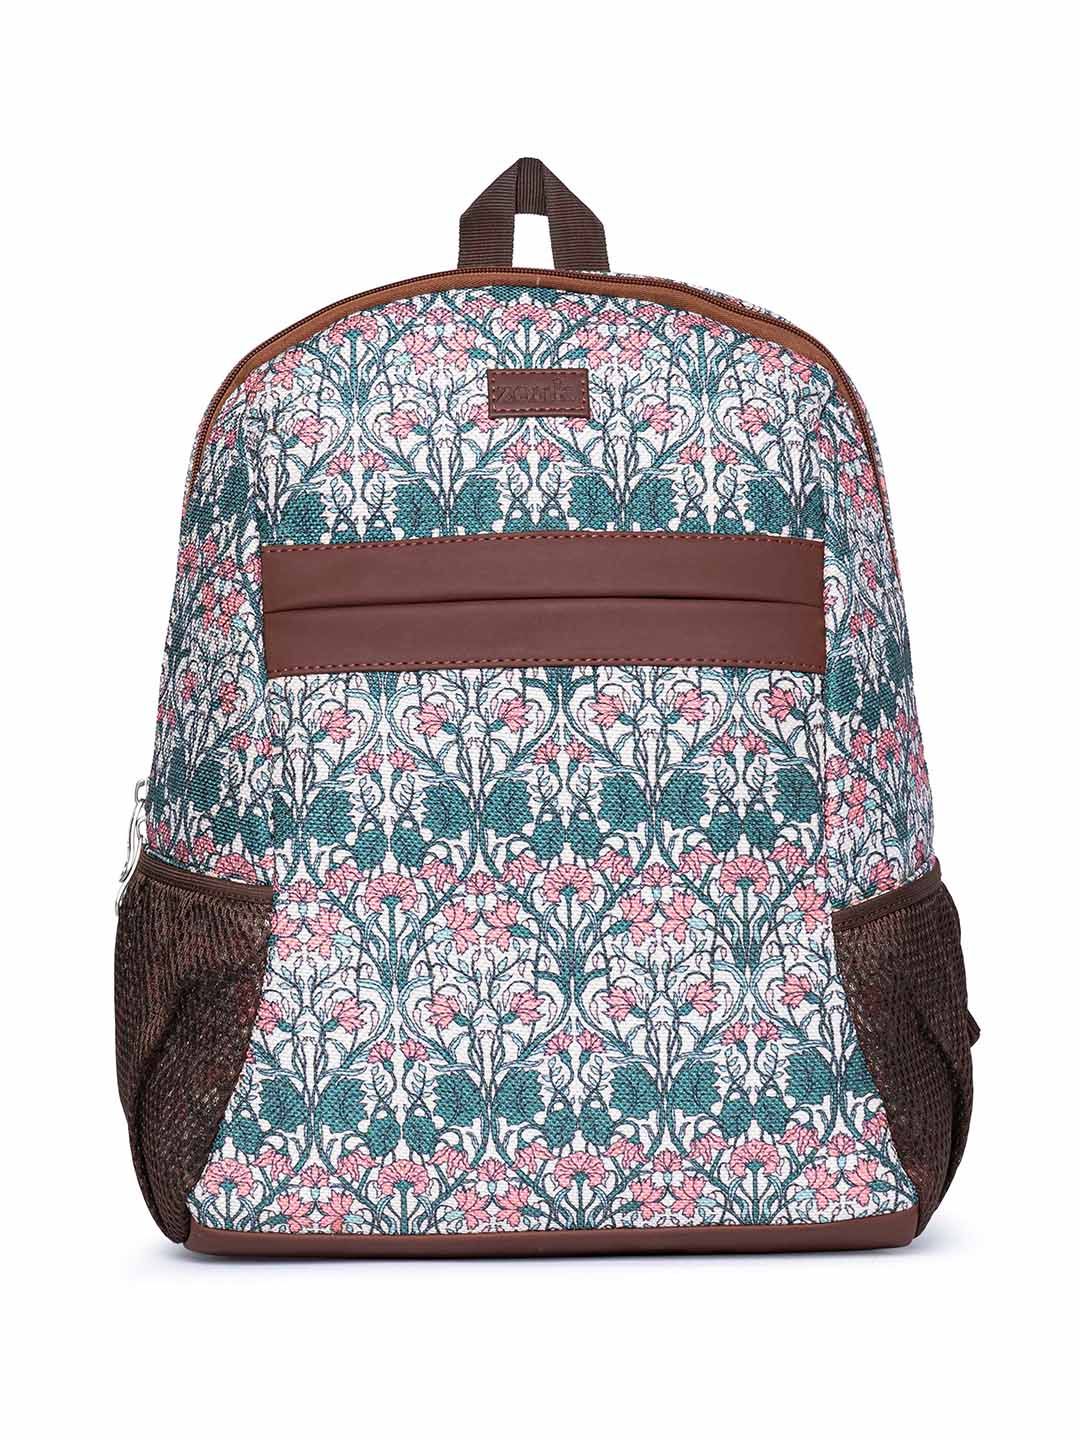 ZOUK Dome Daypack Red Printed Mini Backpack